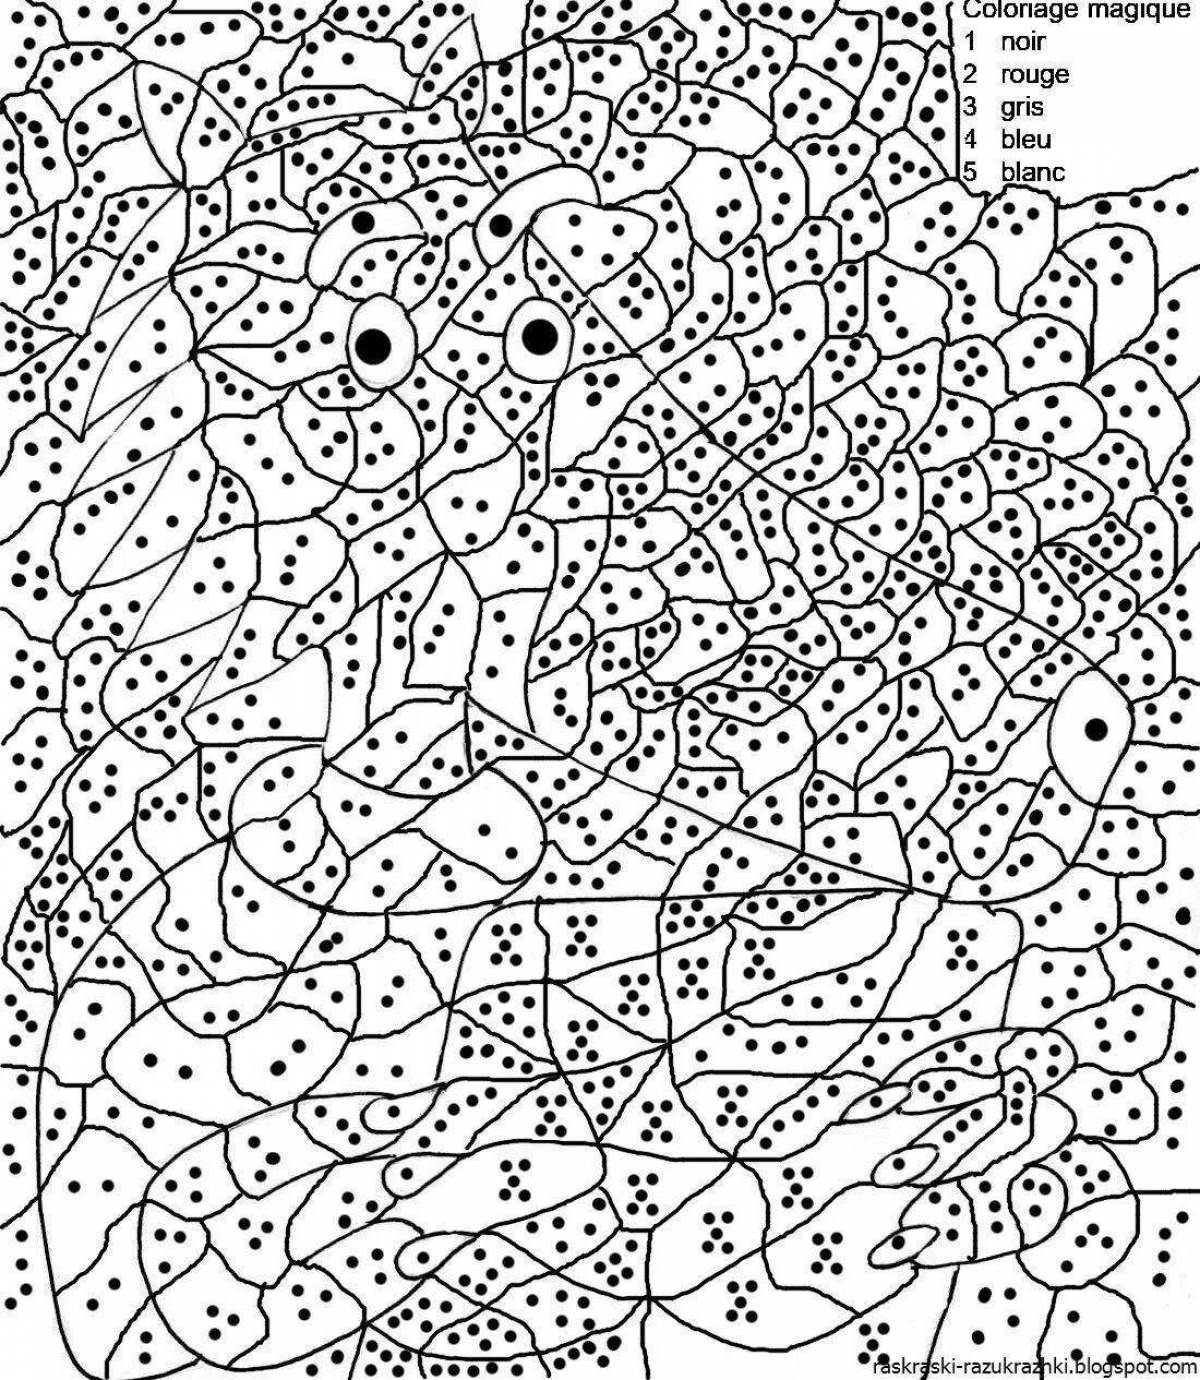 Fun coloring pages with page numbers